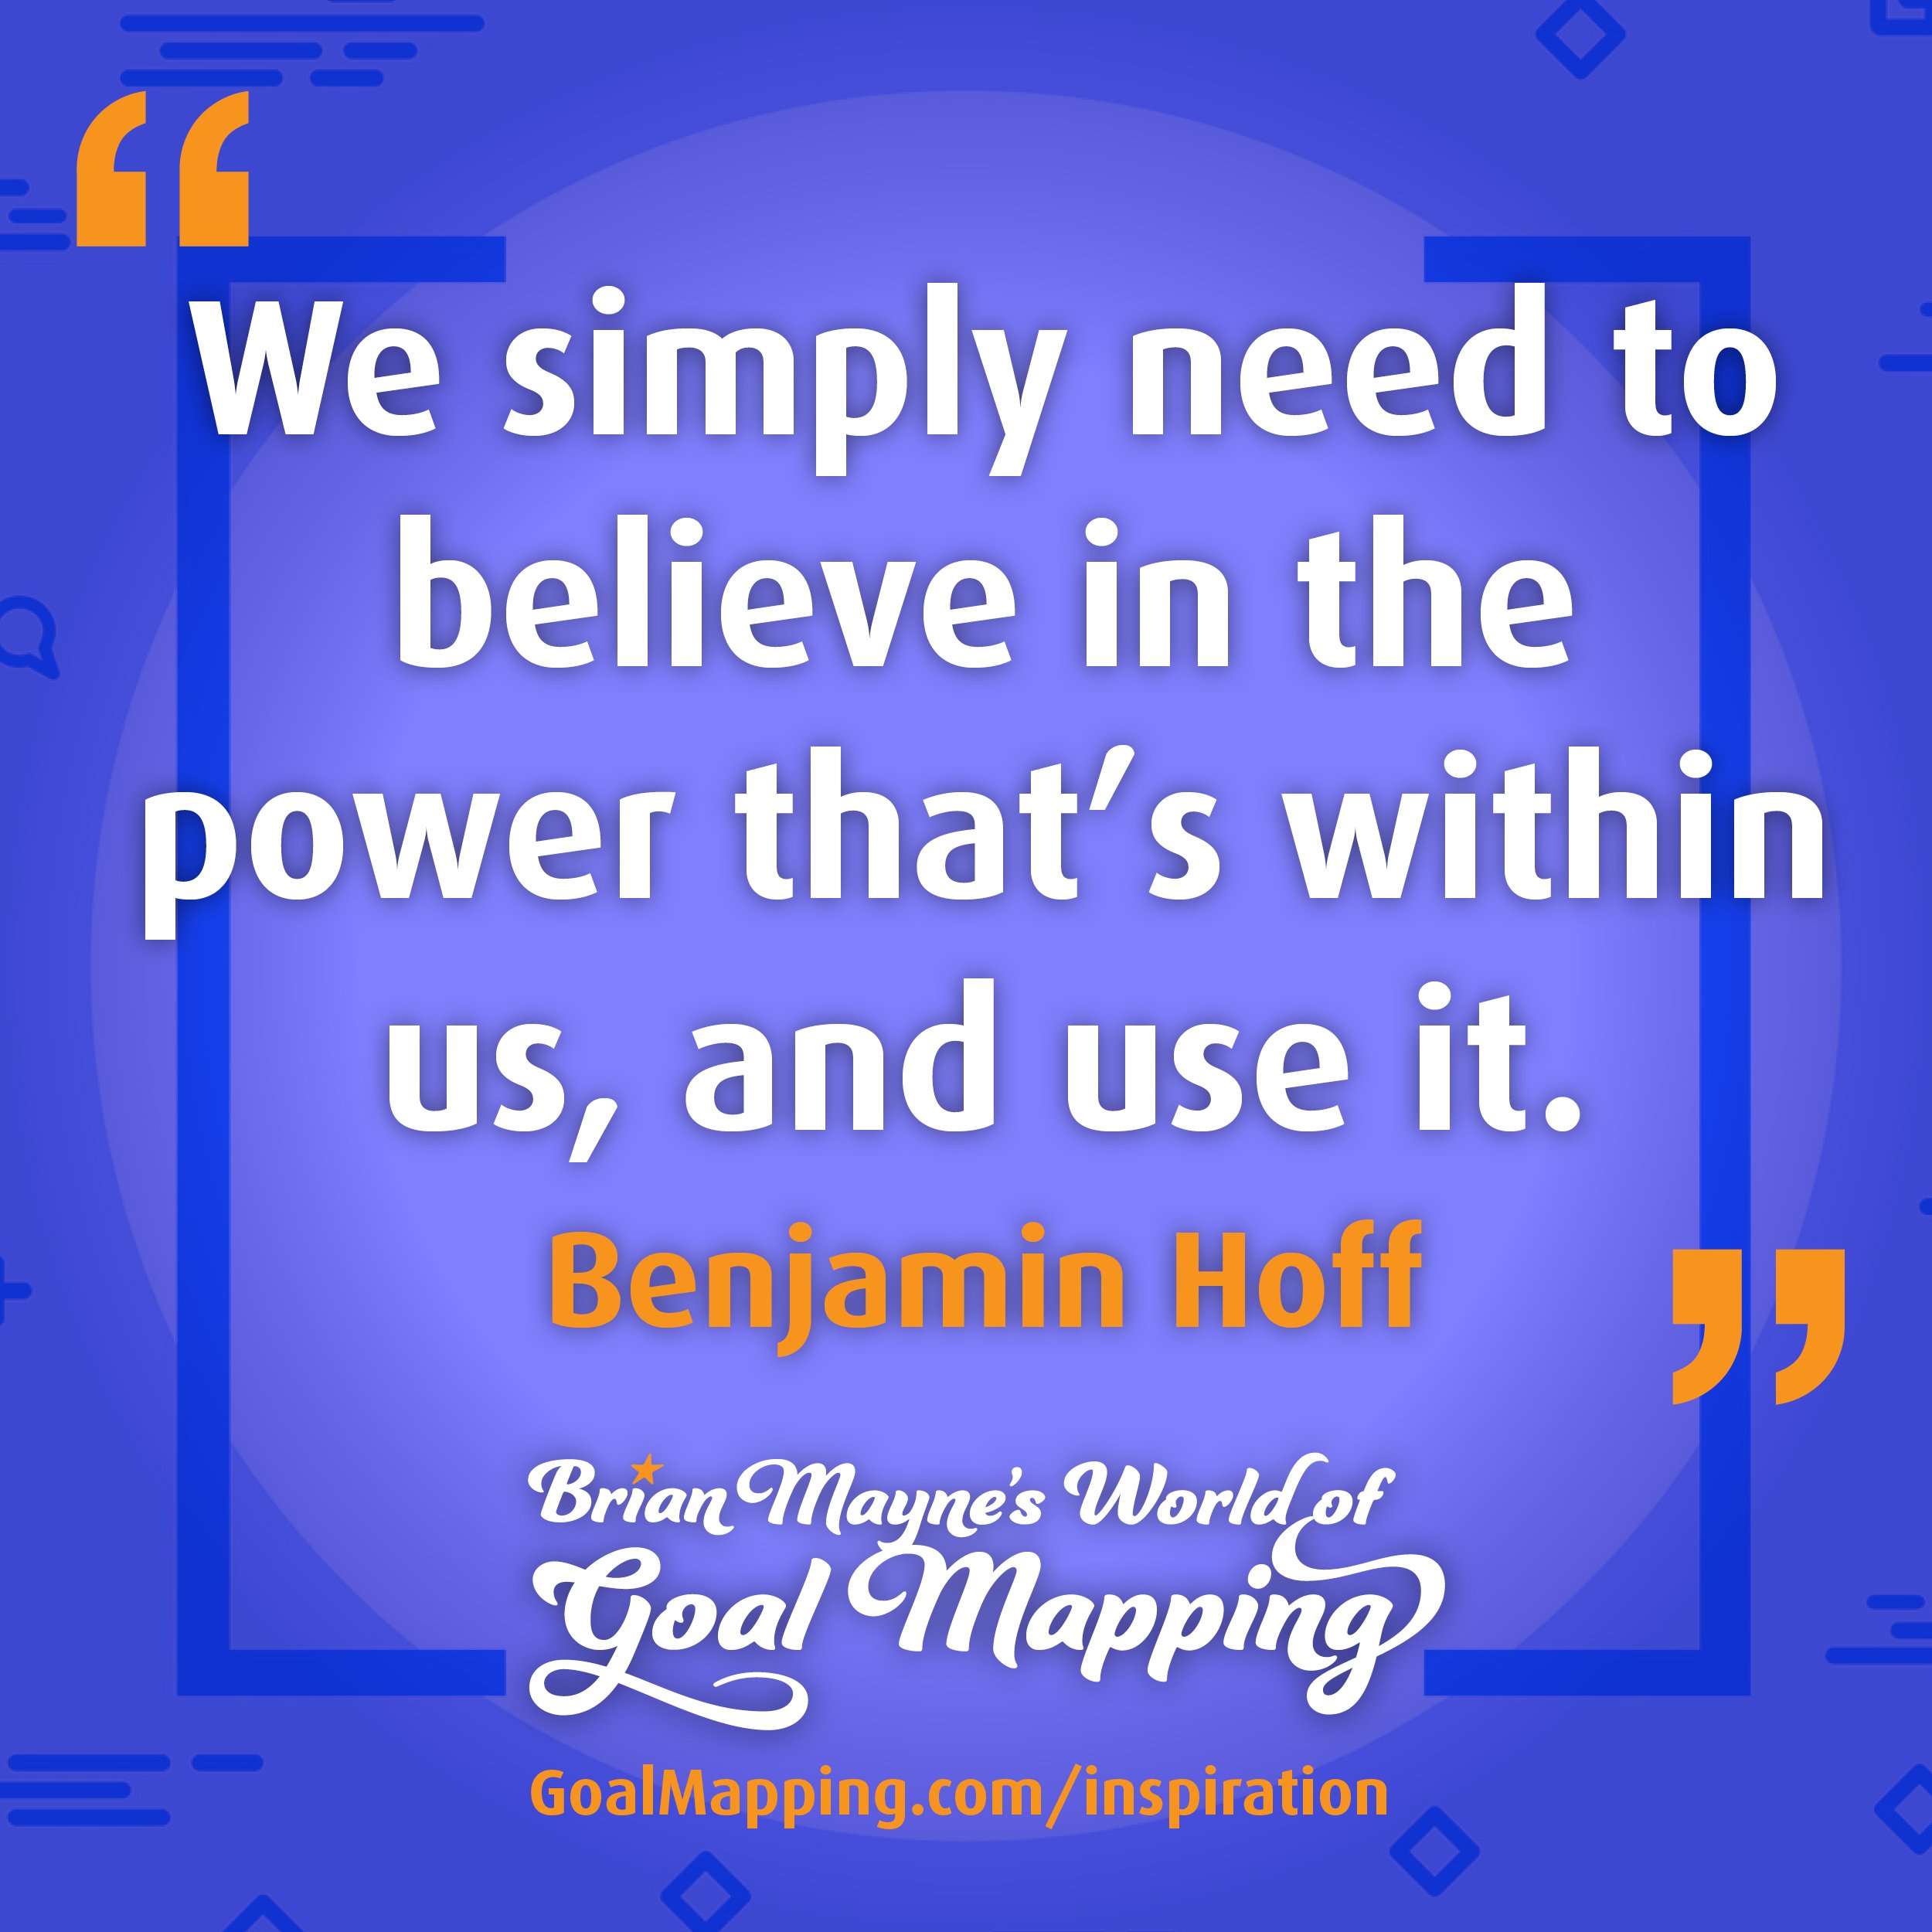 "We simply need to believe in the power that’s within us, and use it." Benjamin Hoff